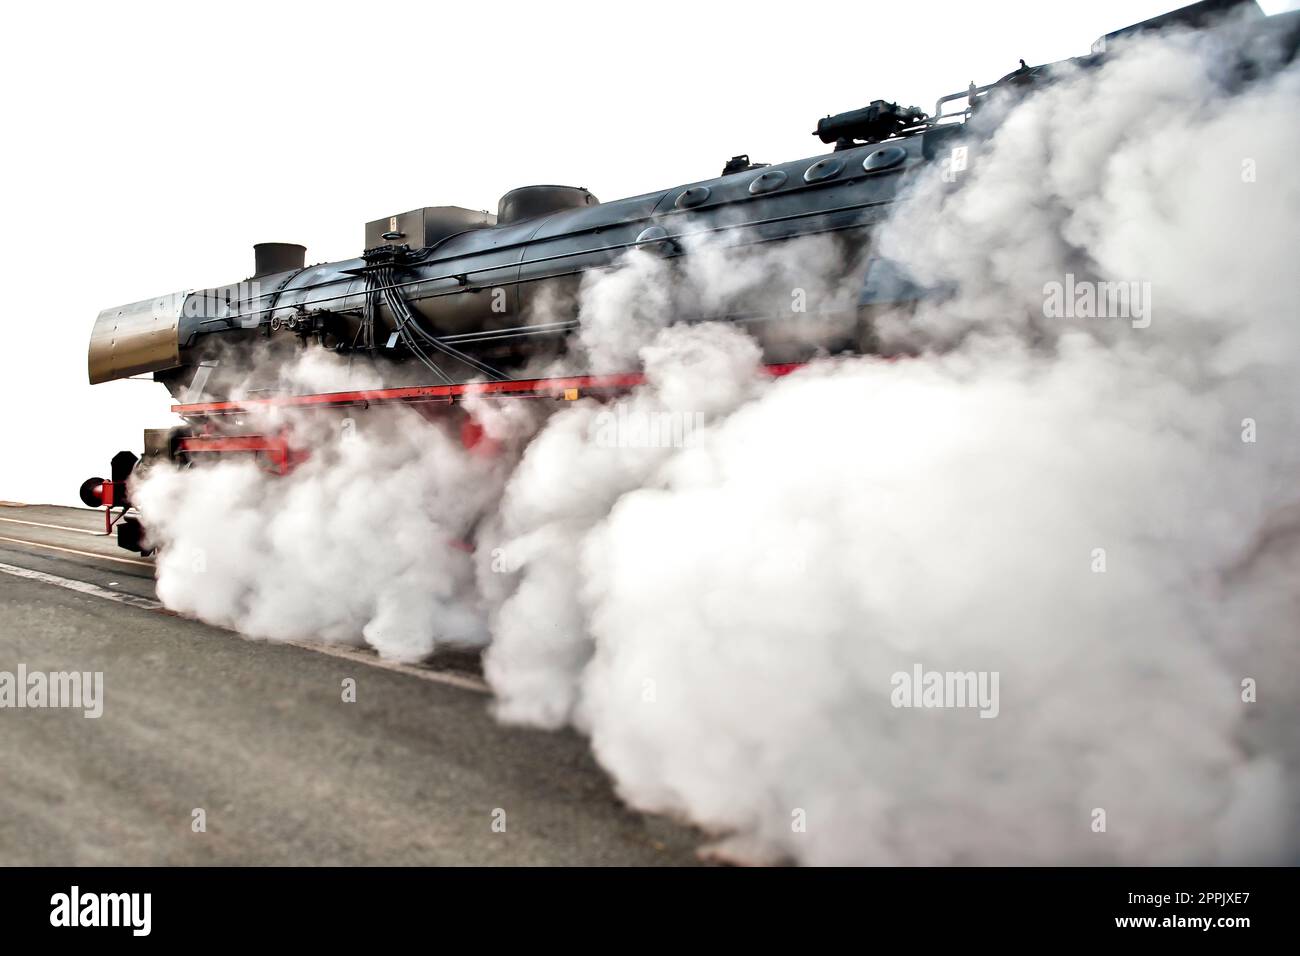 A steam locomotive spews smoke and steam at full speed Stock Photo